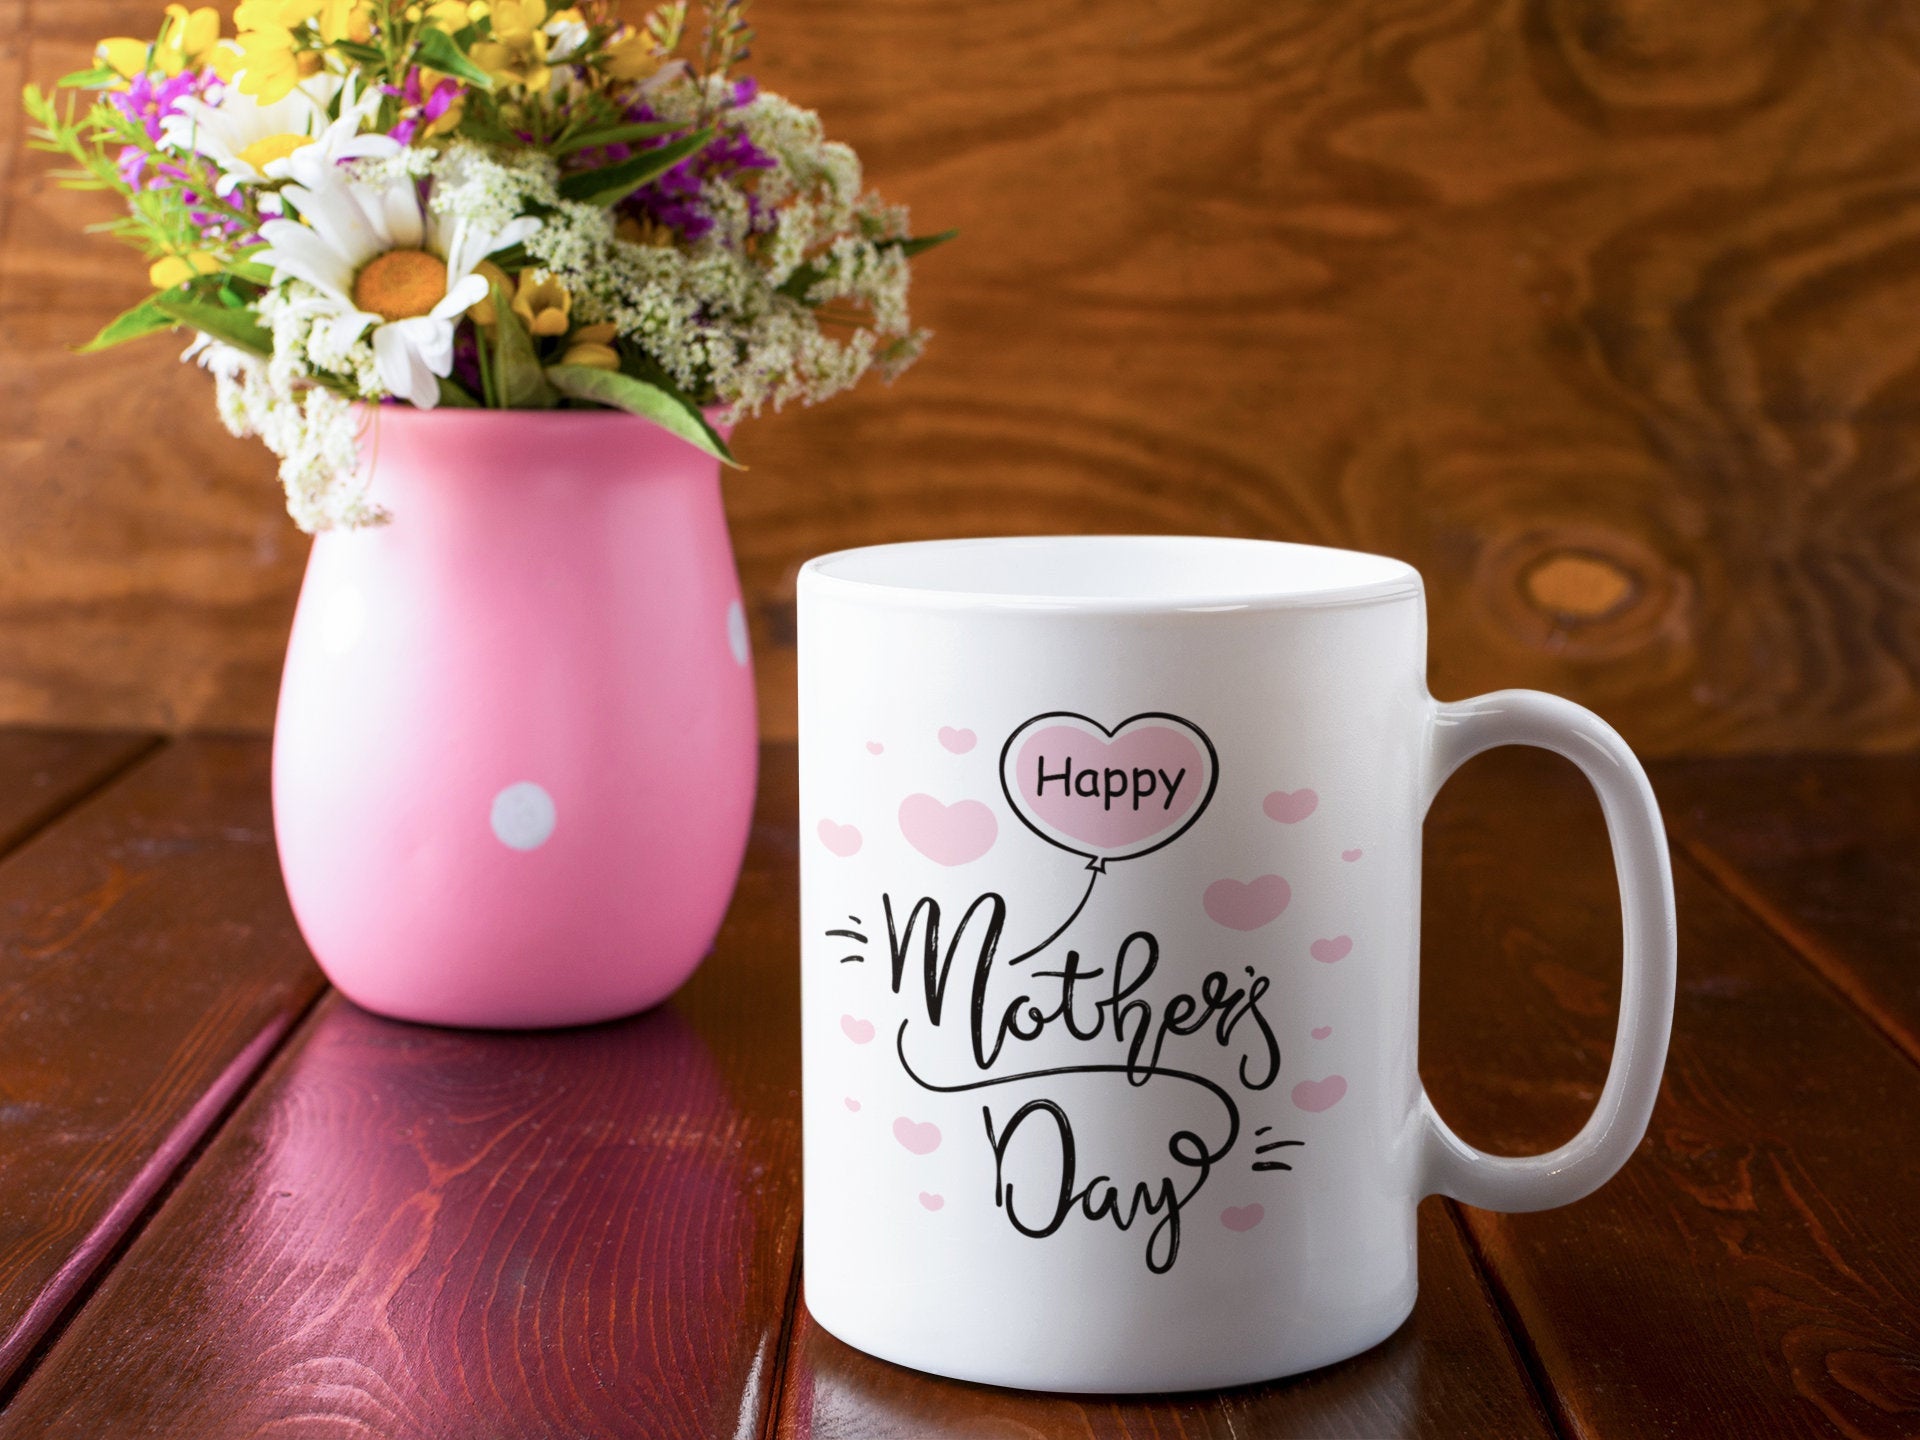 Custom Happy Mothers Day 15oz Mug - Personalized Mothers Day Mug - Large Mothers Day Photo Mug - Mothers Day Gift -Add Your Own Photo & Text